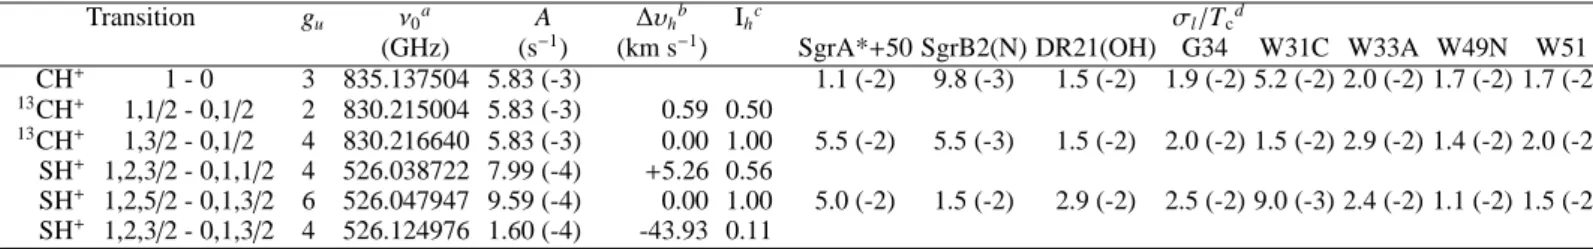 Table 2. CH + X 1 Σ + , 13 CH + X 1 Σ + , and SH + X 3 Σ − spectroscopic parameters for the observed pure rotational transitions